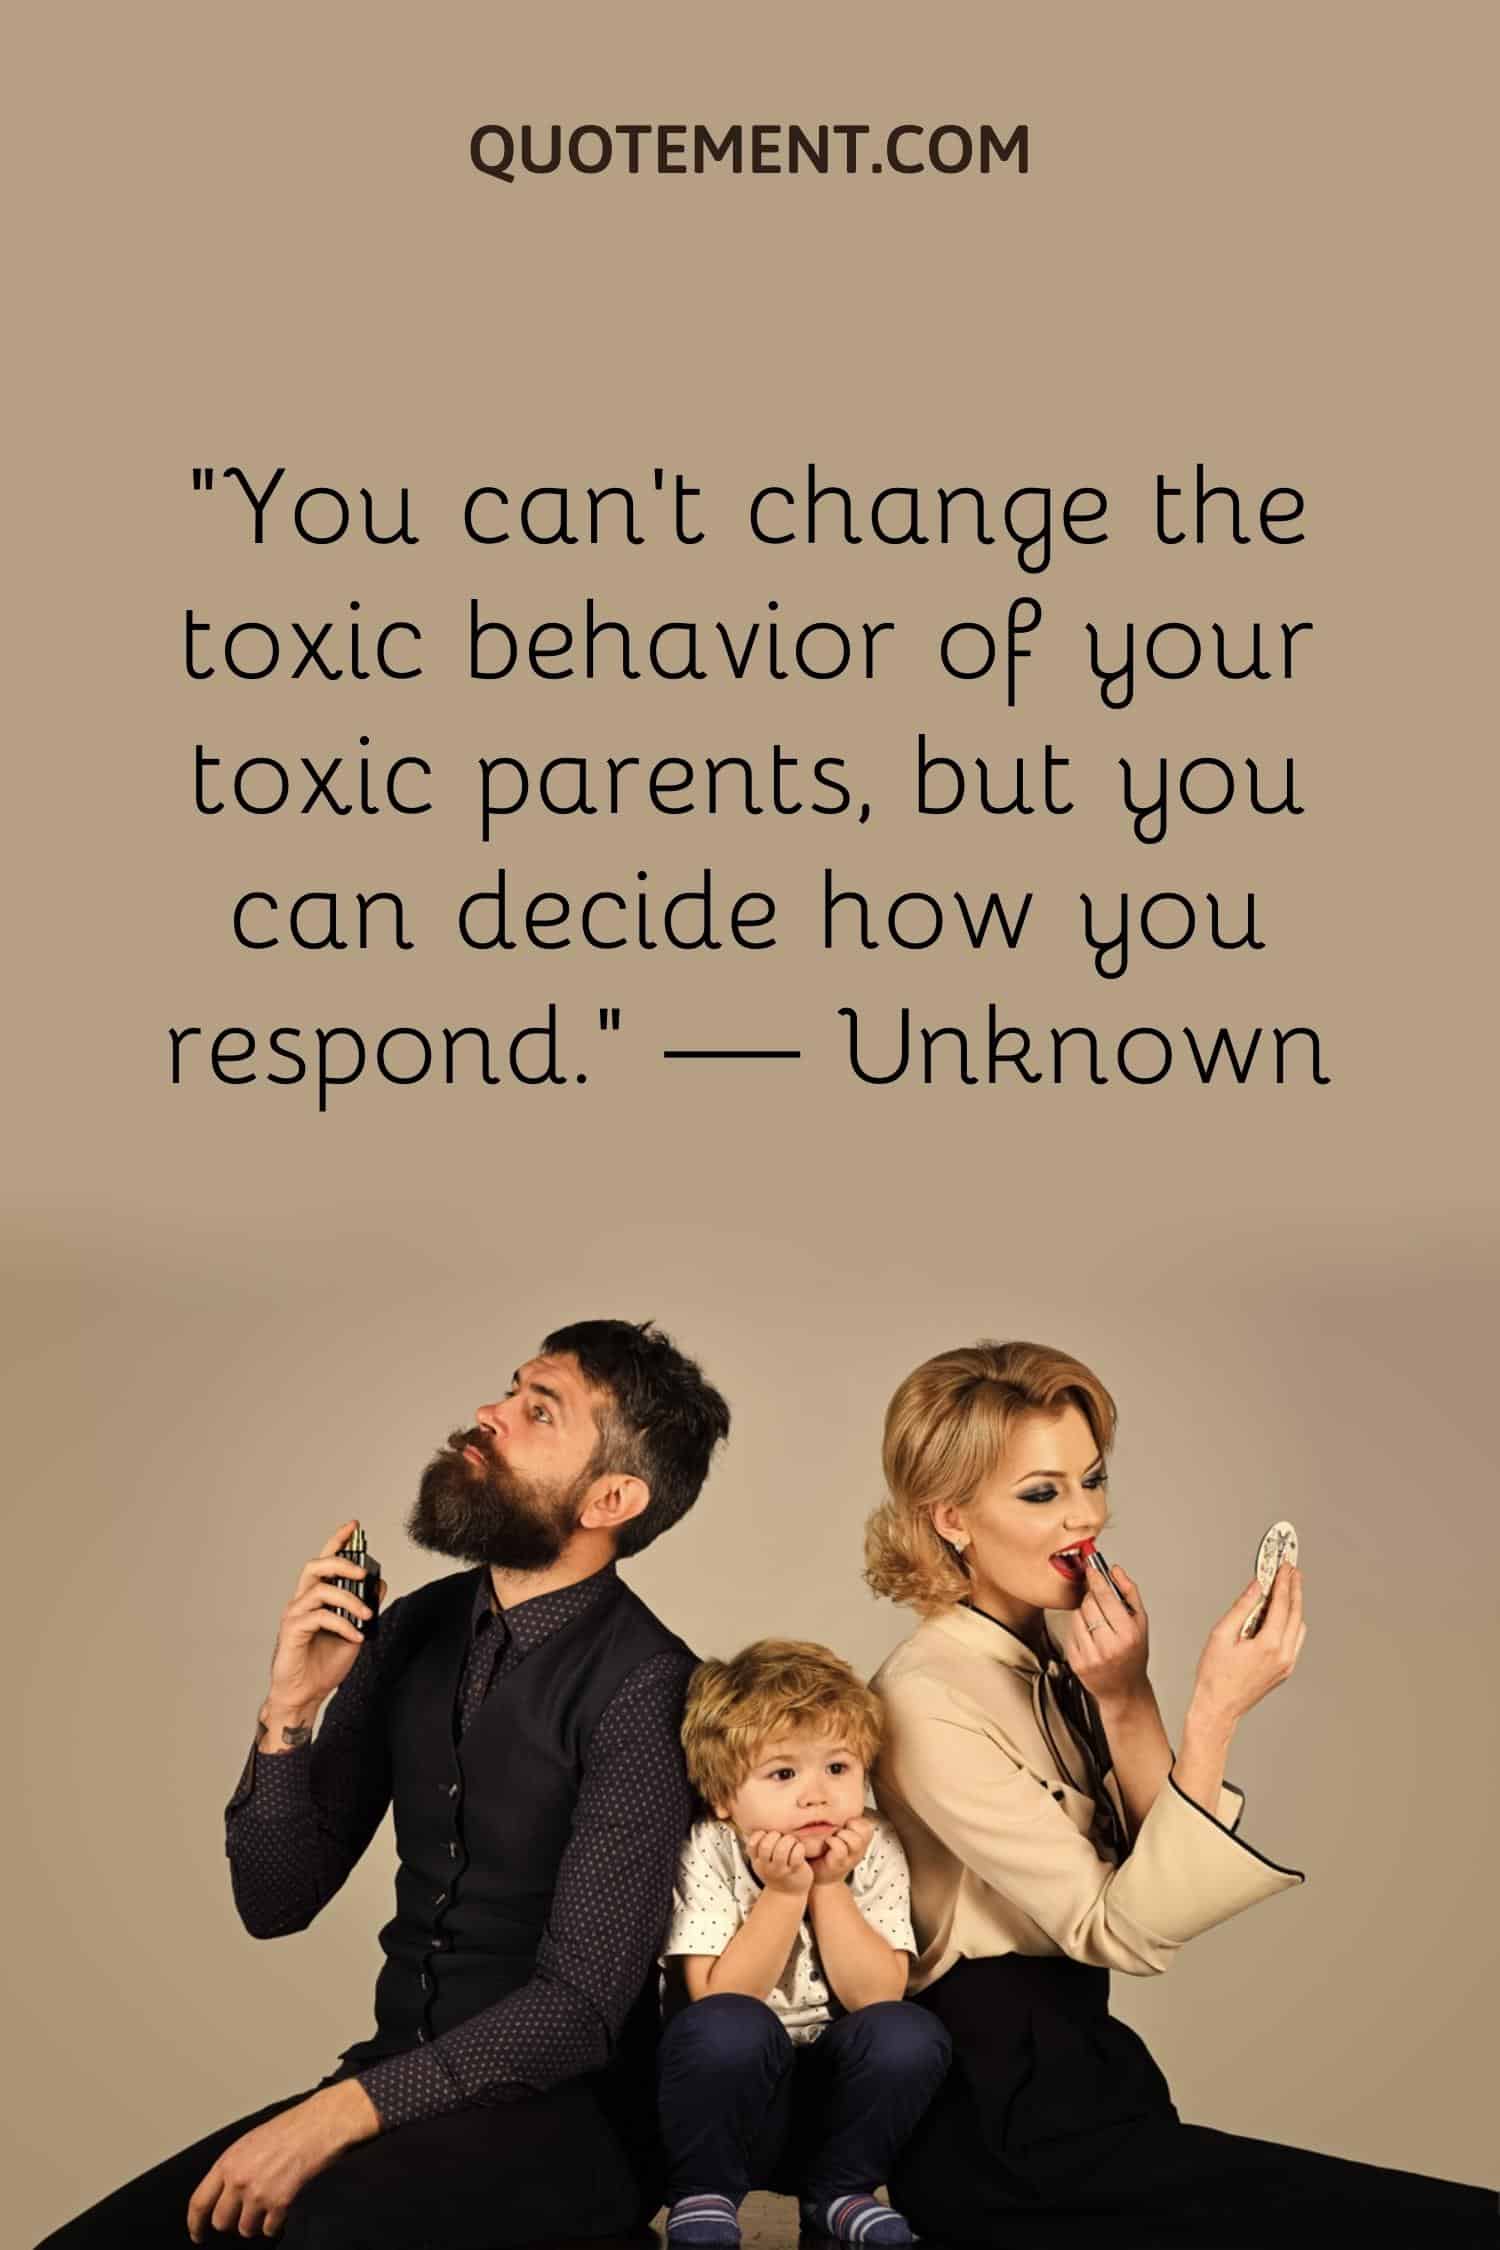 You can’t change the toxic behavior of your toxic parents